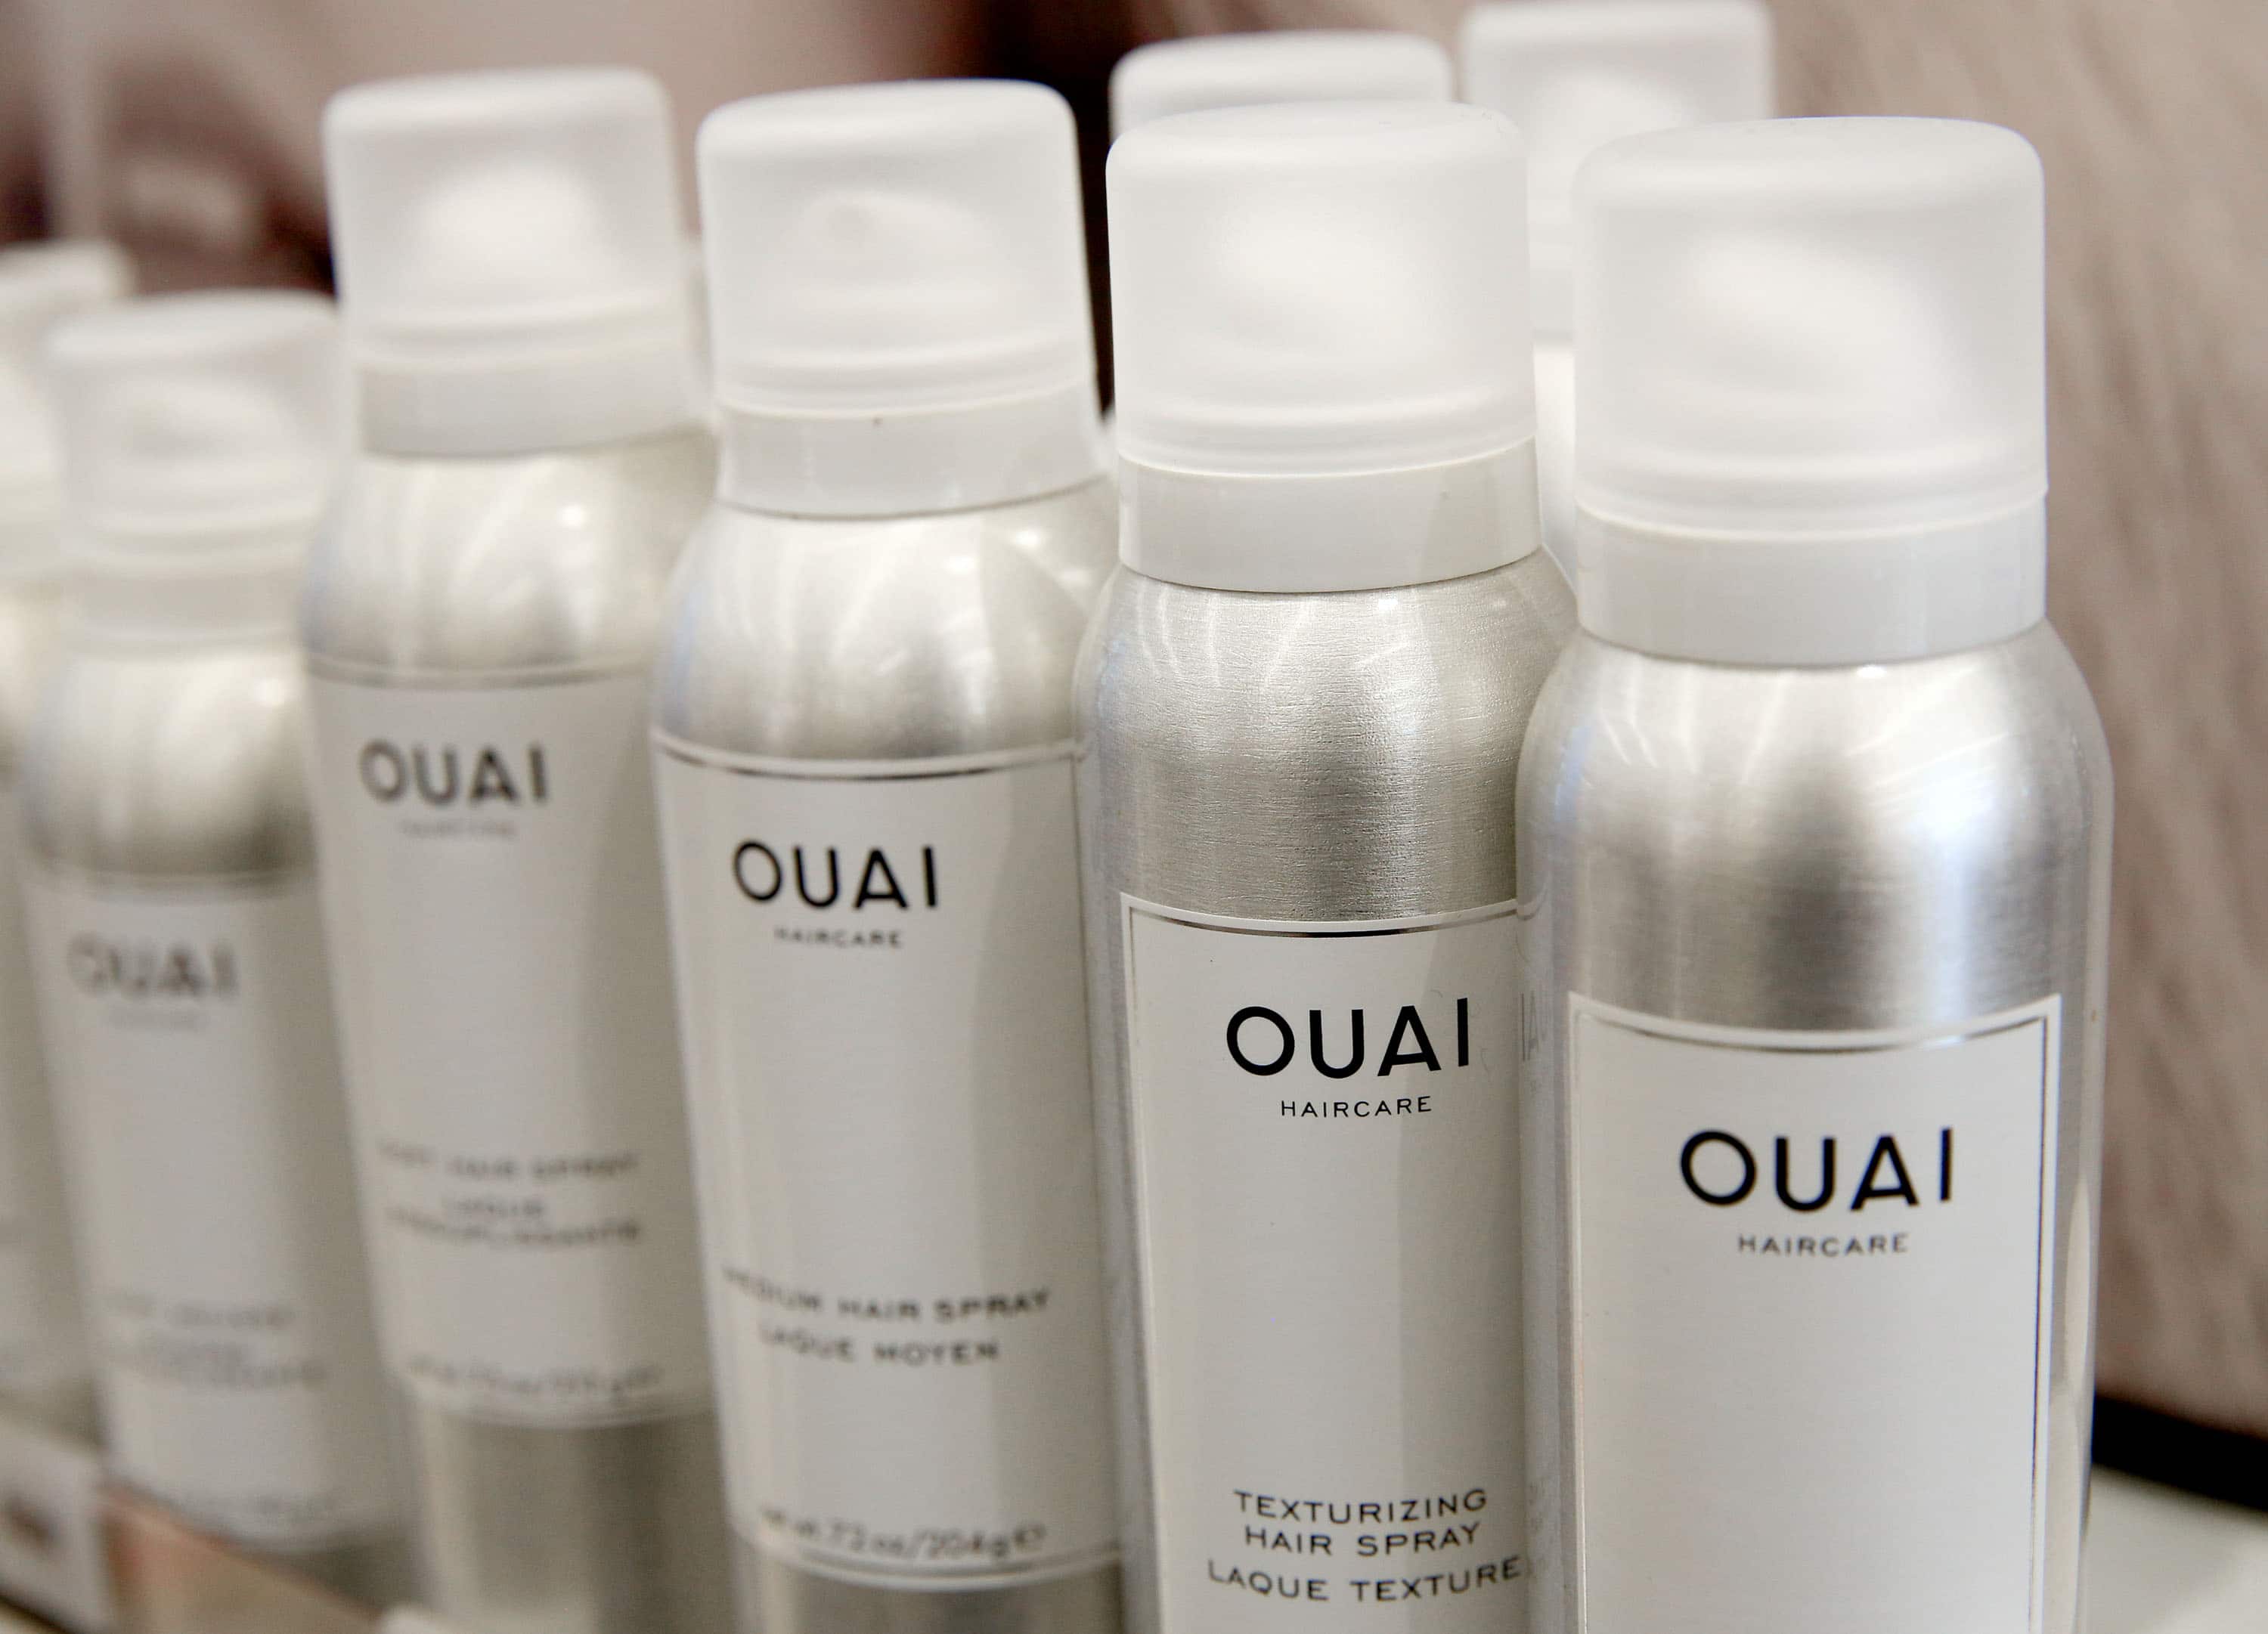 Ouai, the most loved haircare brand on Instagram, launches in India